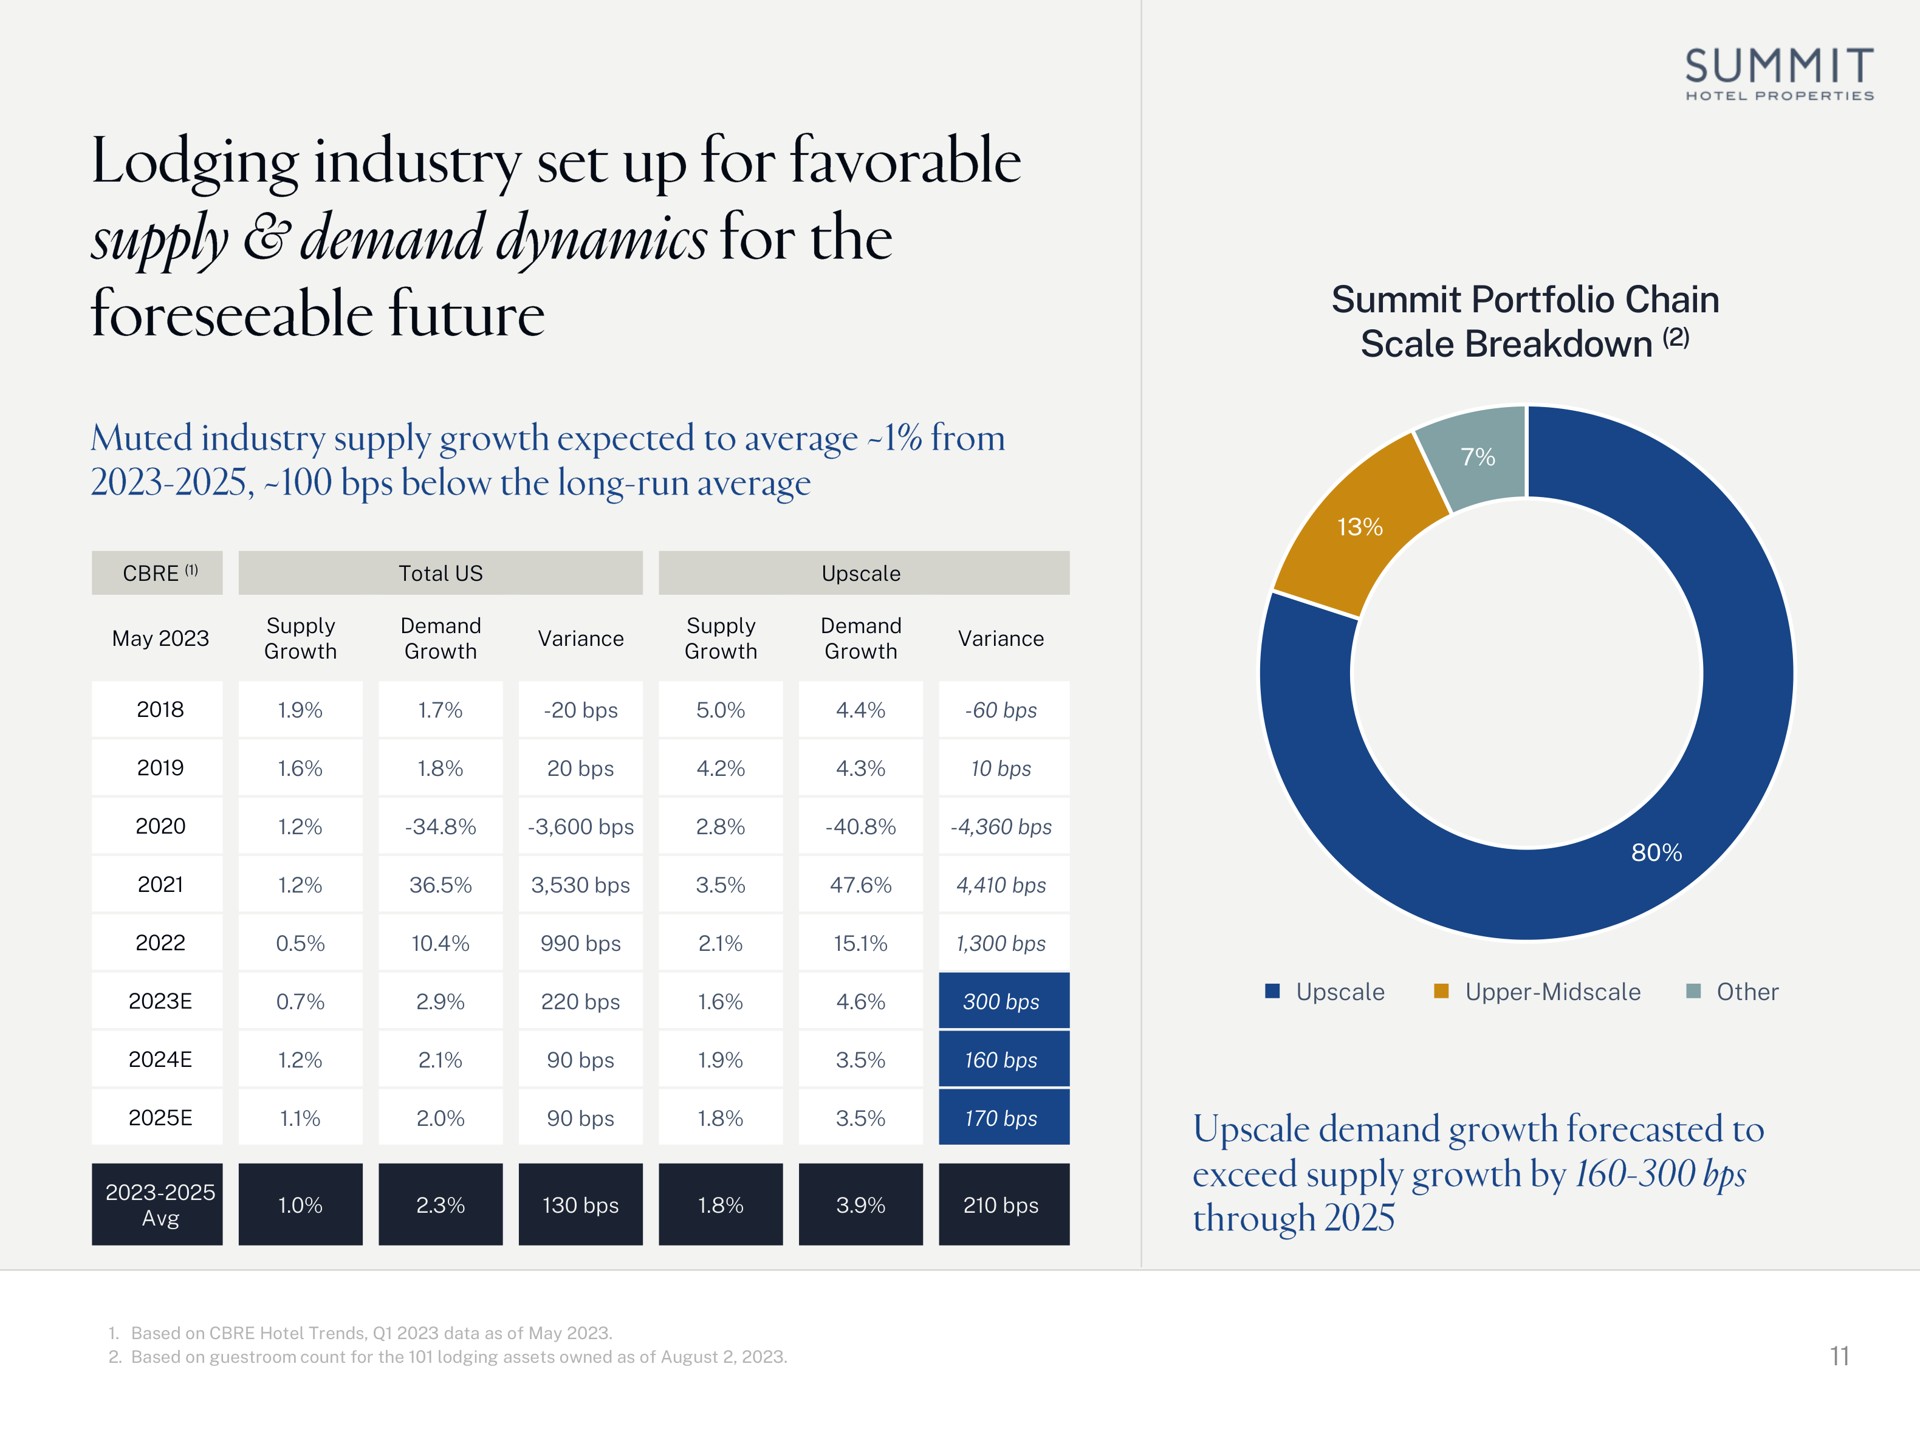 summit portfolio chain scale breakdown upscale upper other lodging industry set up for favorable supply demand dynamics for the foreseeable future variance growth growth | Summit Hotel Properties